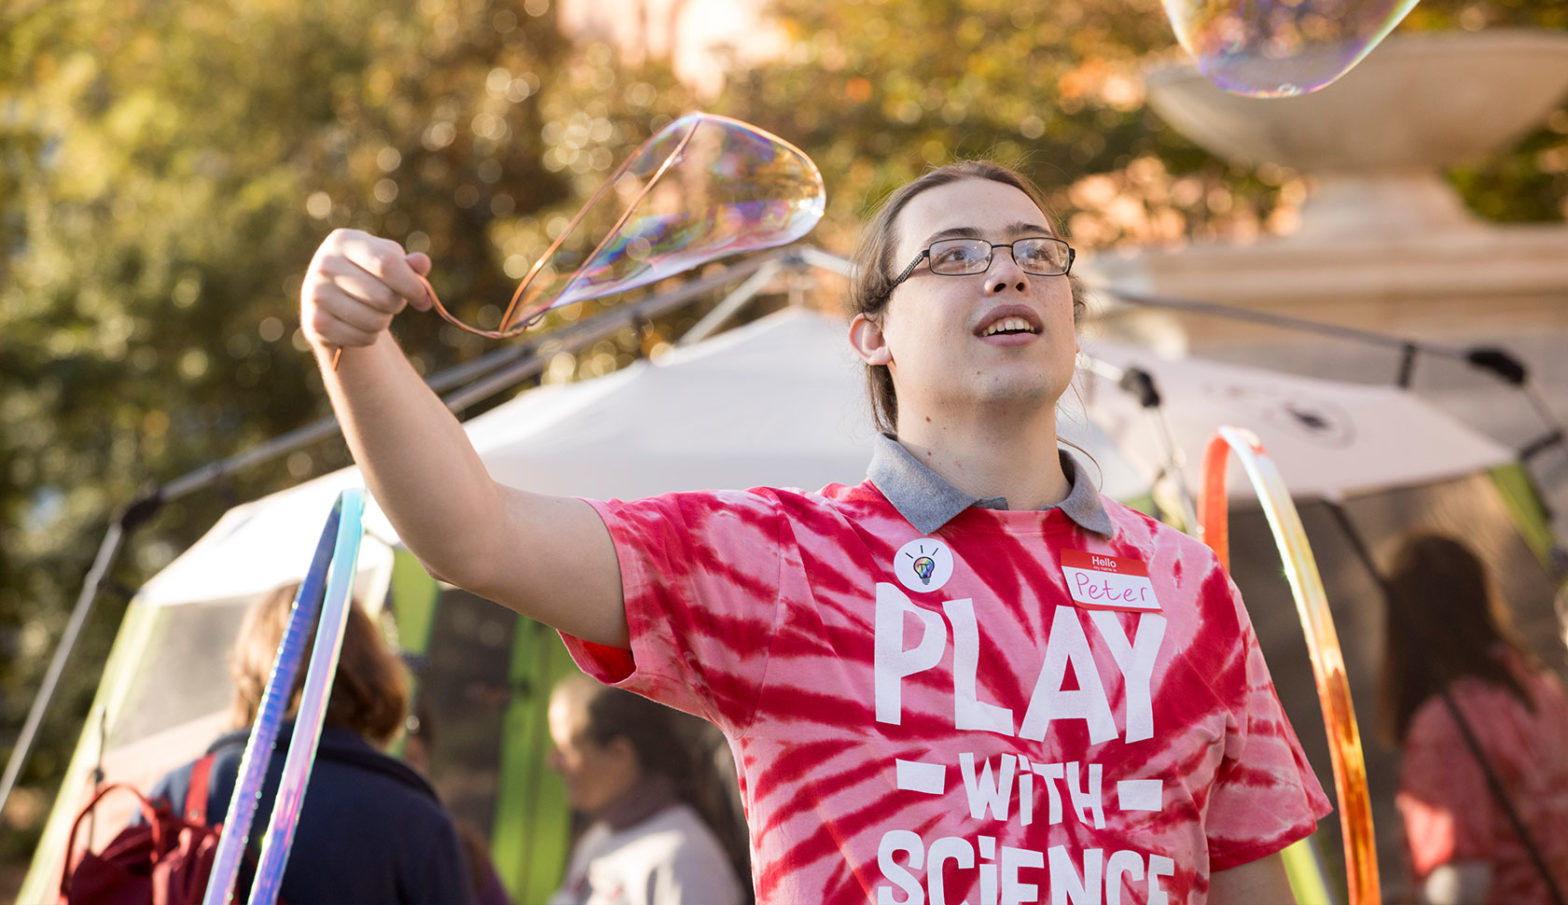 student playing with bubbles